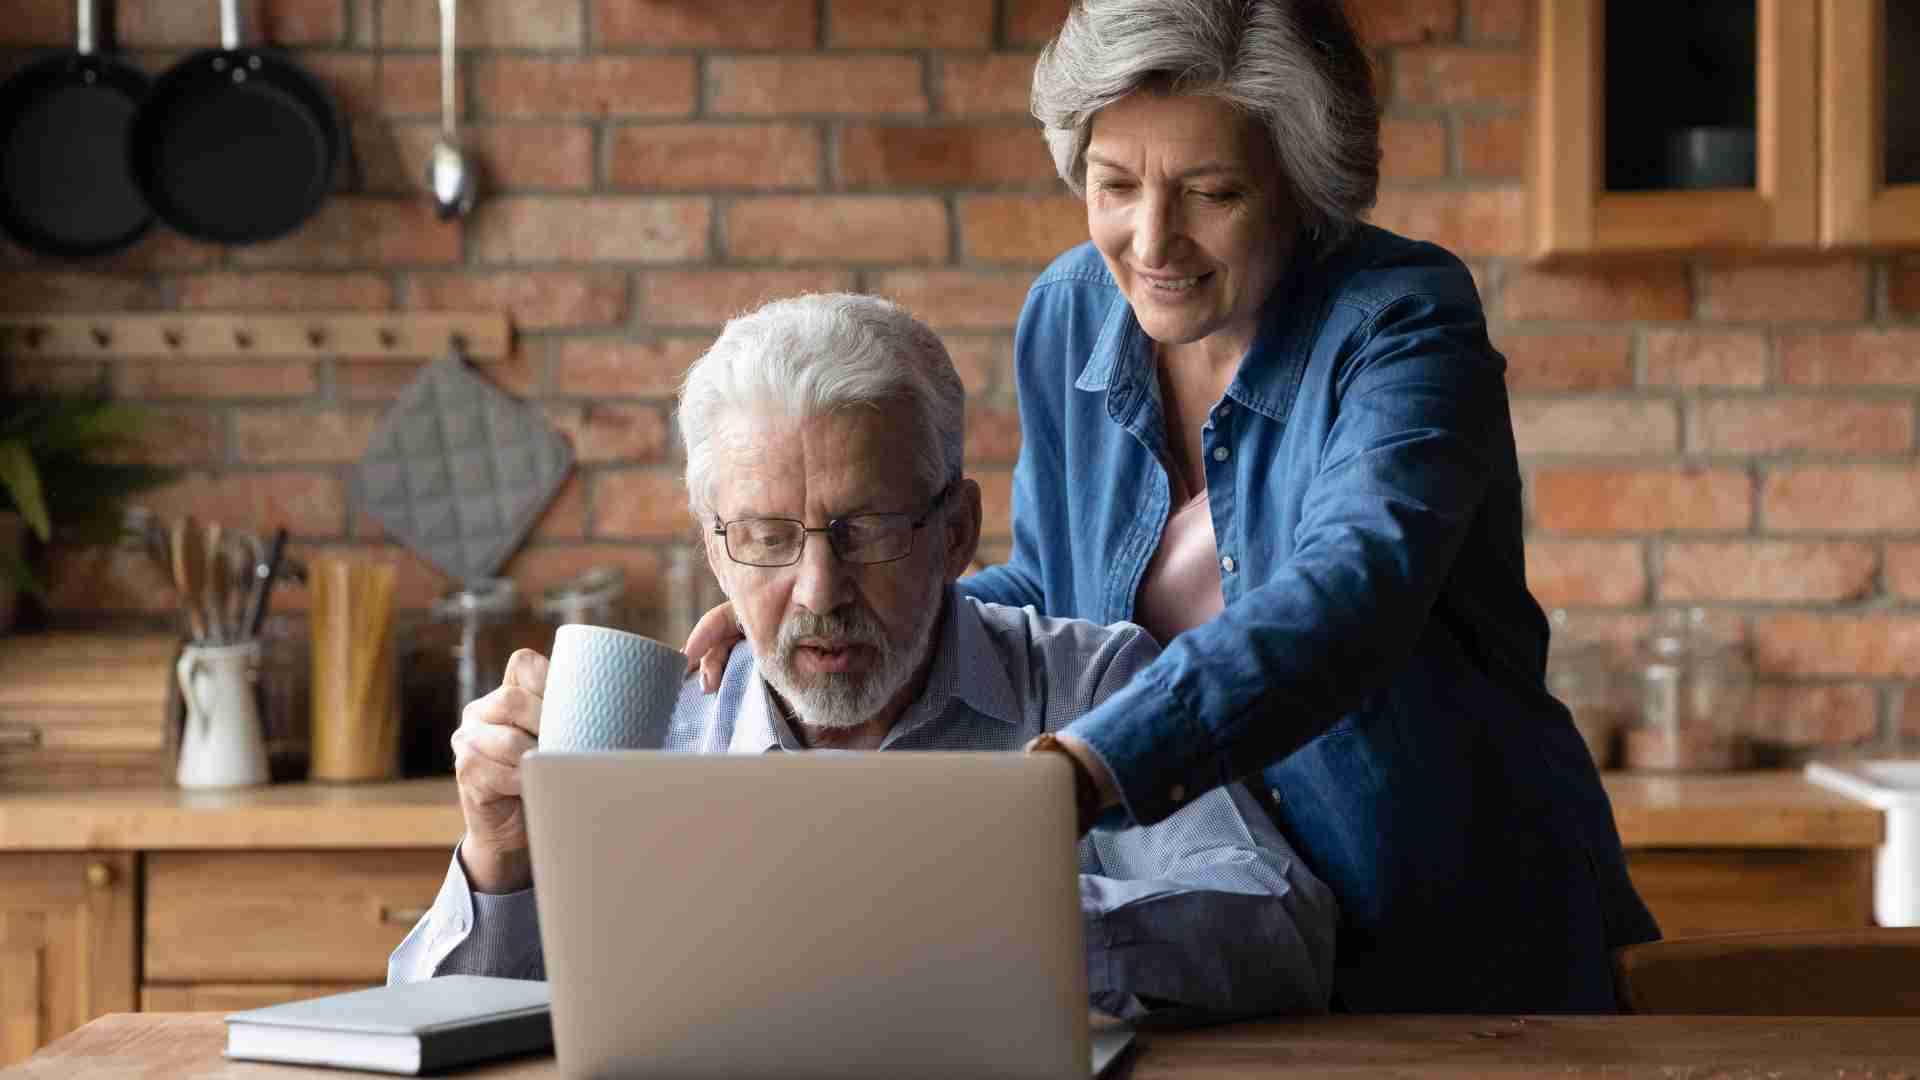 Some eligible couples can receive a Social Security payment this week if they are on retirement benefits